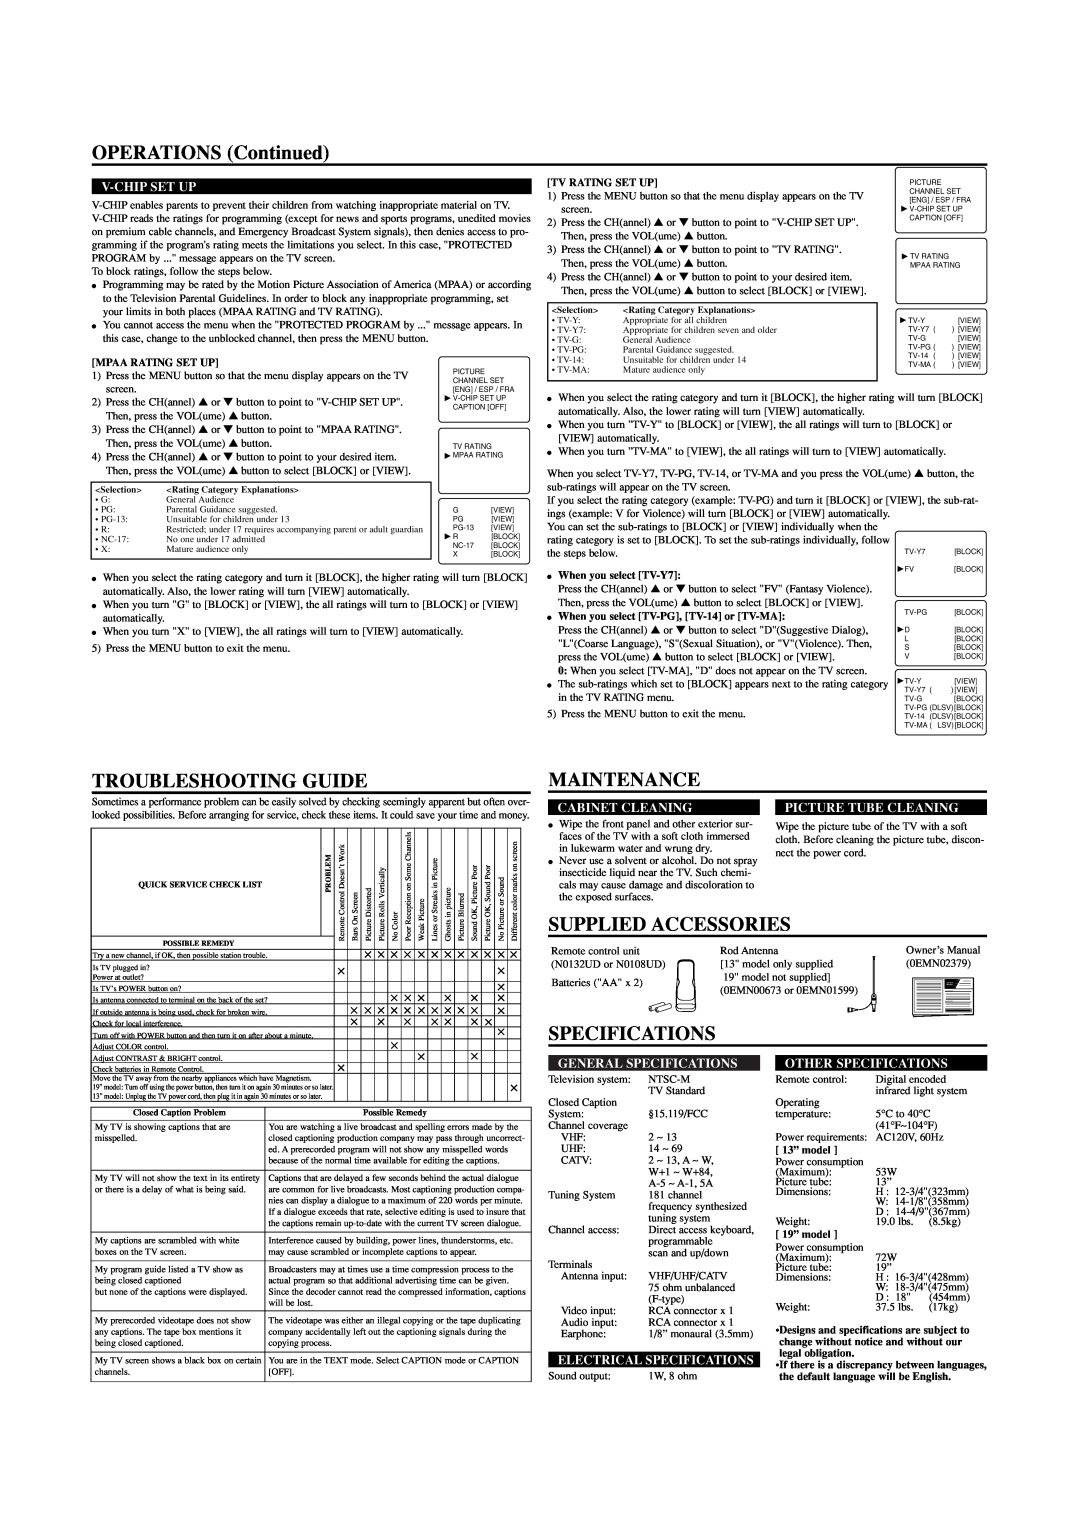 Sylvania C6413TE, C5419TE OPERATIONS Continued, Troubleshooting Guide, Maintenance, Supplied Accessories, Specifications 